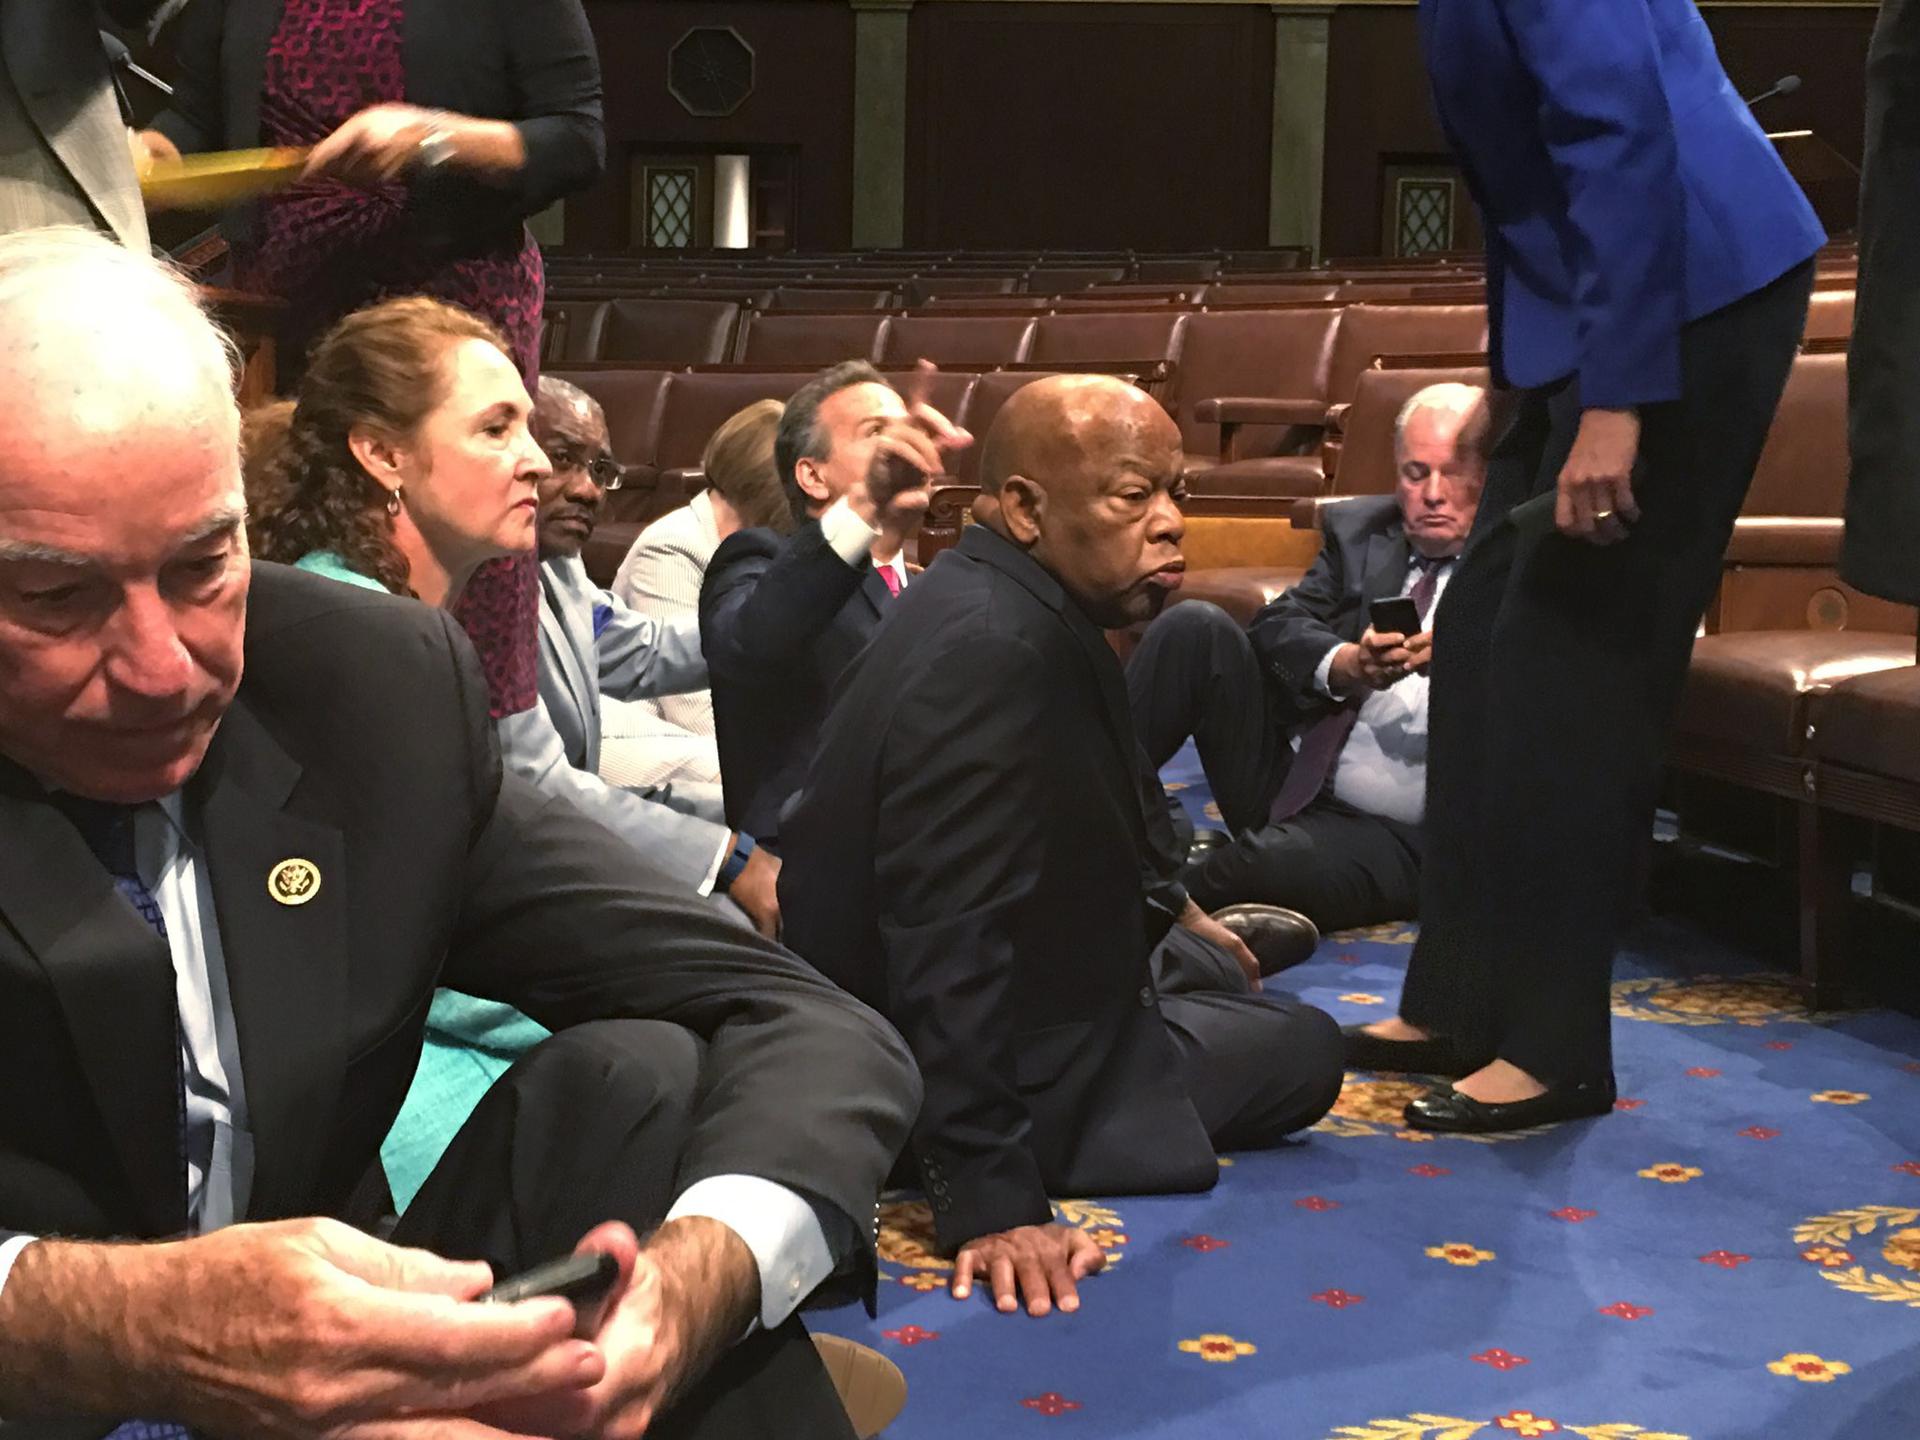 A photo shot and tweeted from the floor of the House by U.S. House Rep. John Yarmuth shows Democratic members of the U.S. House of Representatives, including Rep. Joe Courtney (L) and Rep. John Lewis (C) staging a sit-in on the House floor "to demand acti